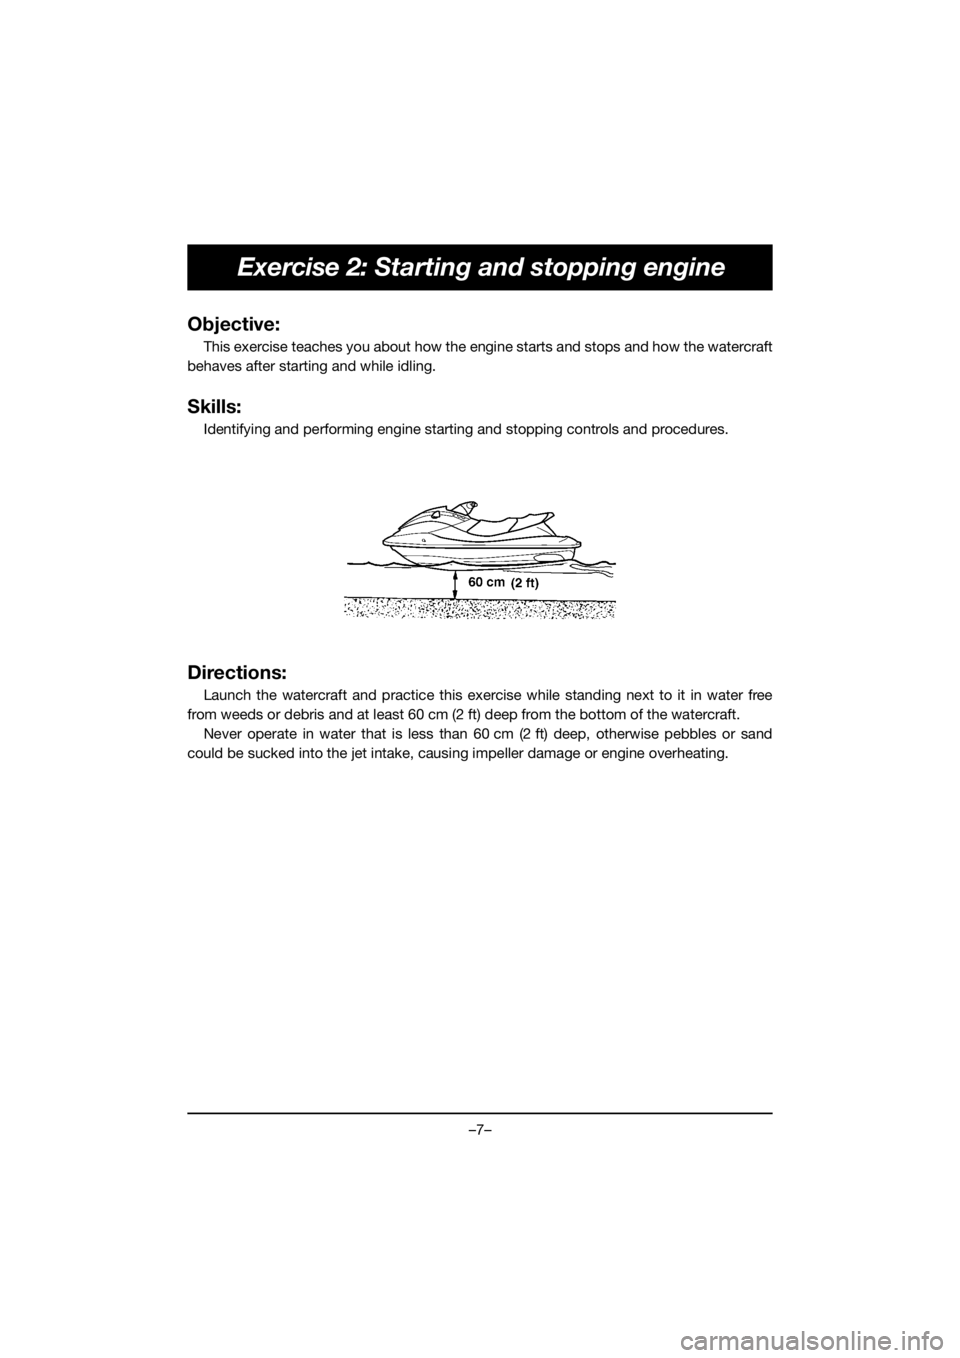 YAMAHA EX 2019  Manual de utilização (in Portuguese) –7–
Exercise 2: Starting and stopping engine
Objective:
This exercise teaches you about how the engine starts and stops and how the watercraft
behaves after starting and while idling.
Skills:
Iden